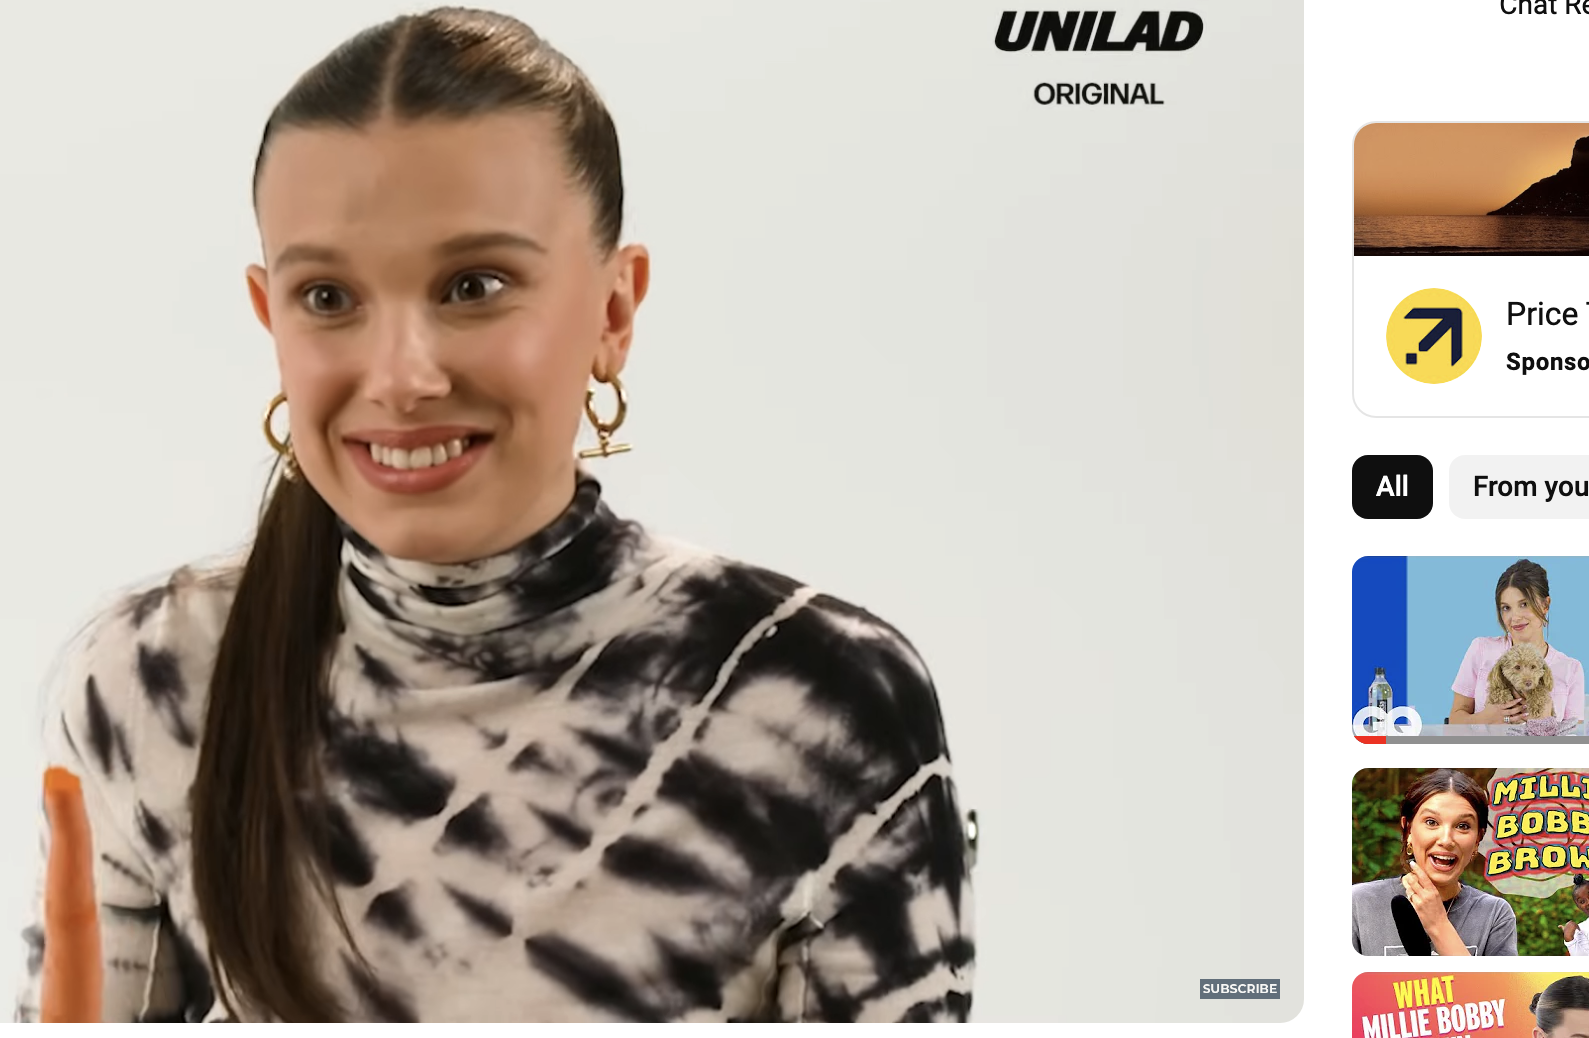 Millie Bobby Brown smiling in a spotted top, holding a carrot